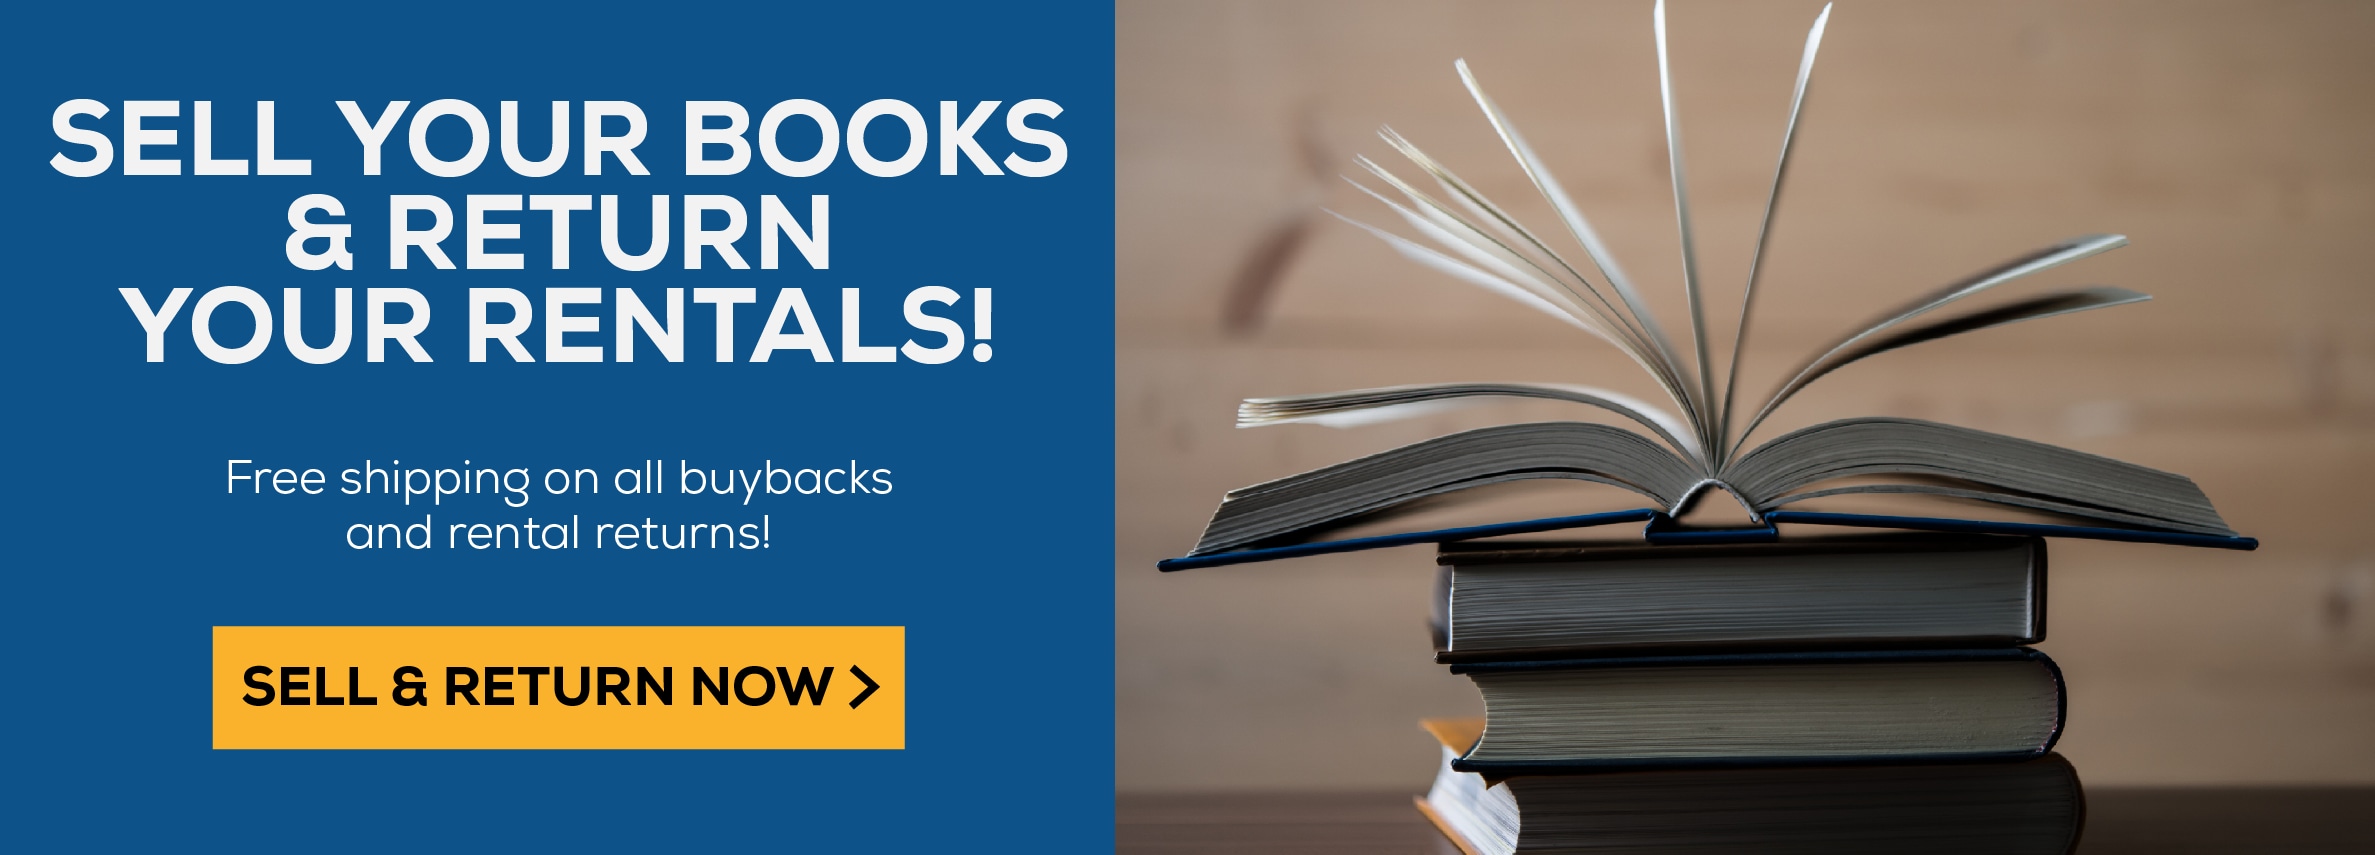 Sell books and return rentals online! Free shipping on all buybacks and rental returns. Sell and return now.